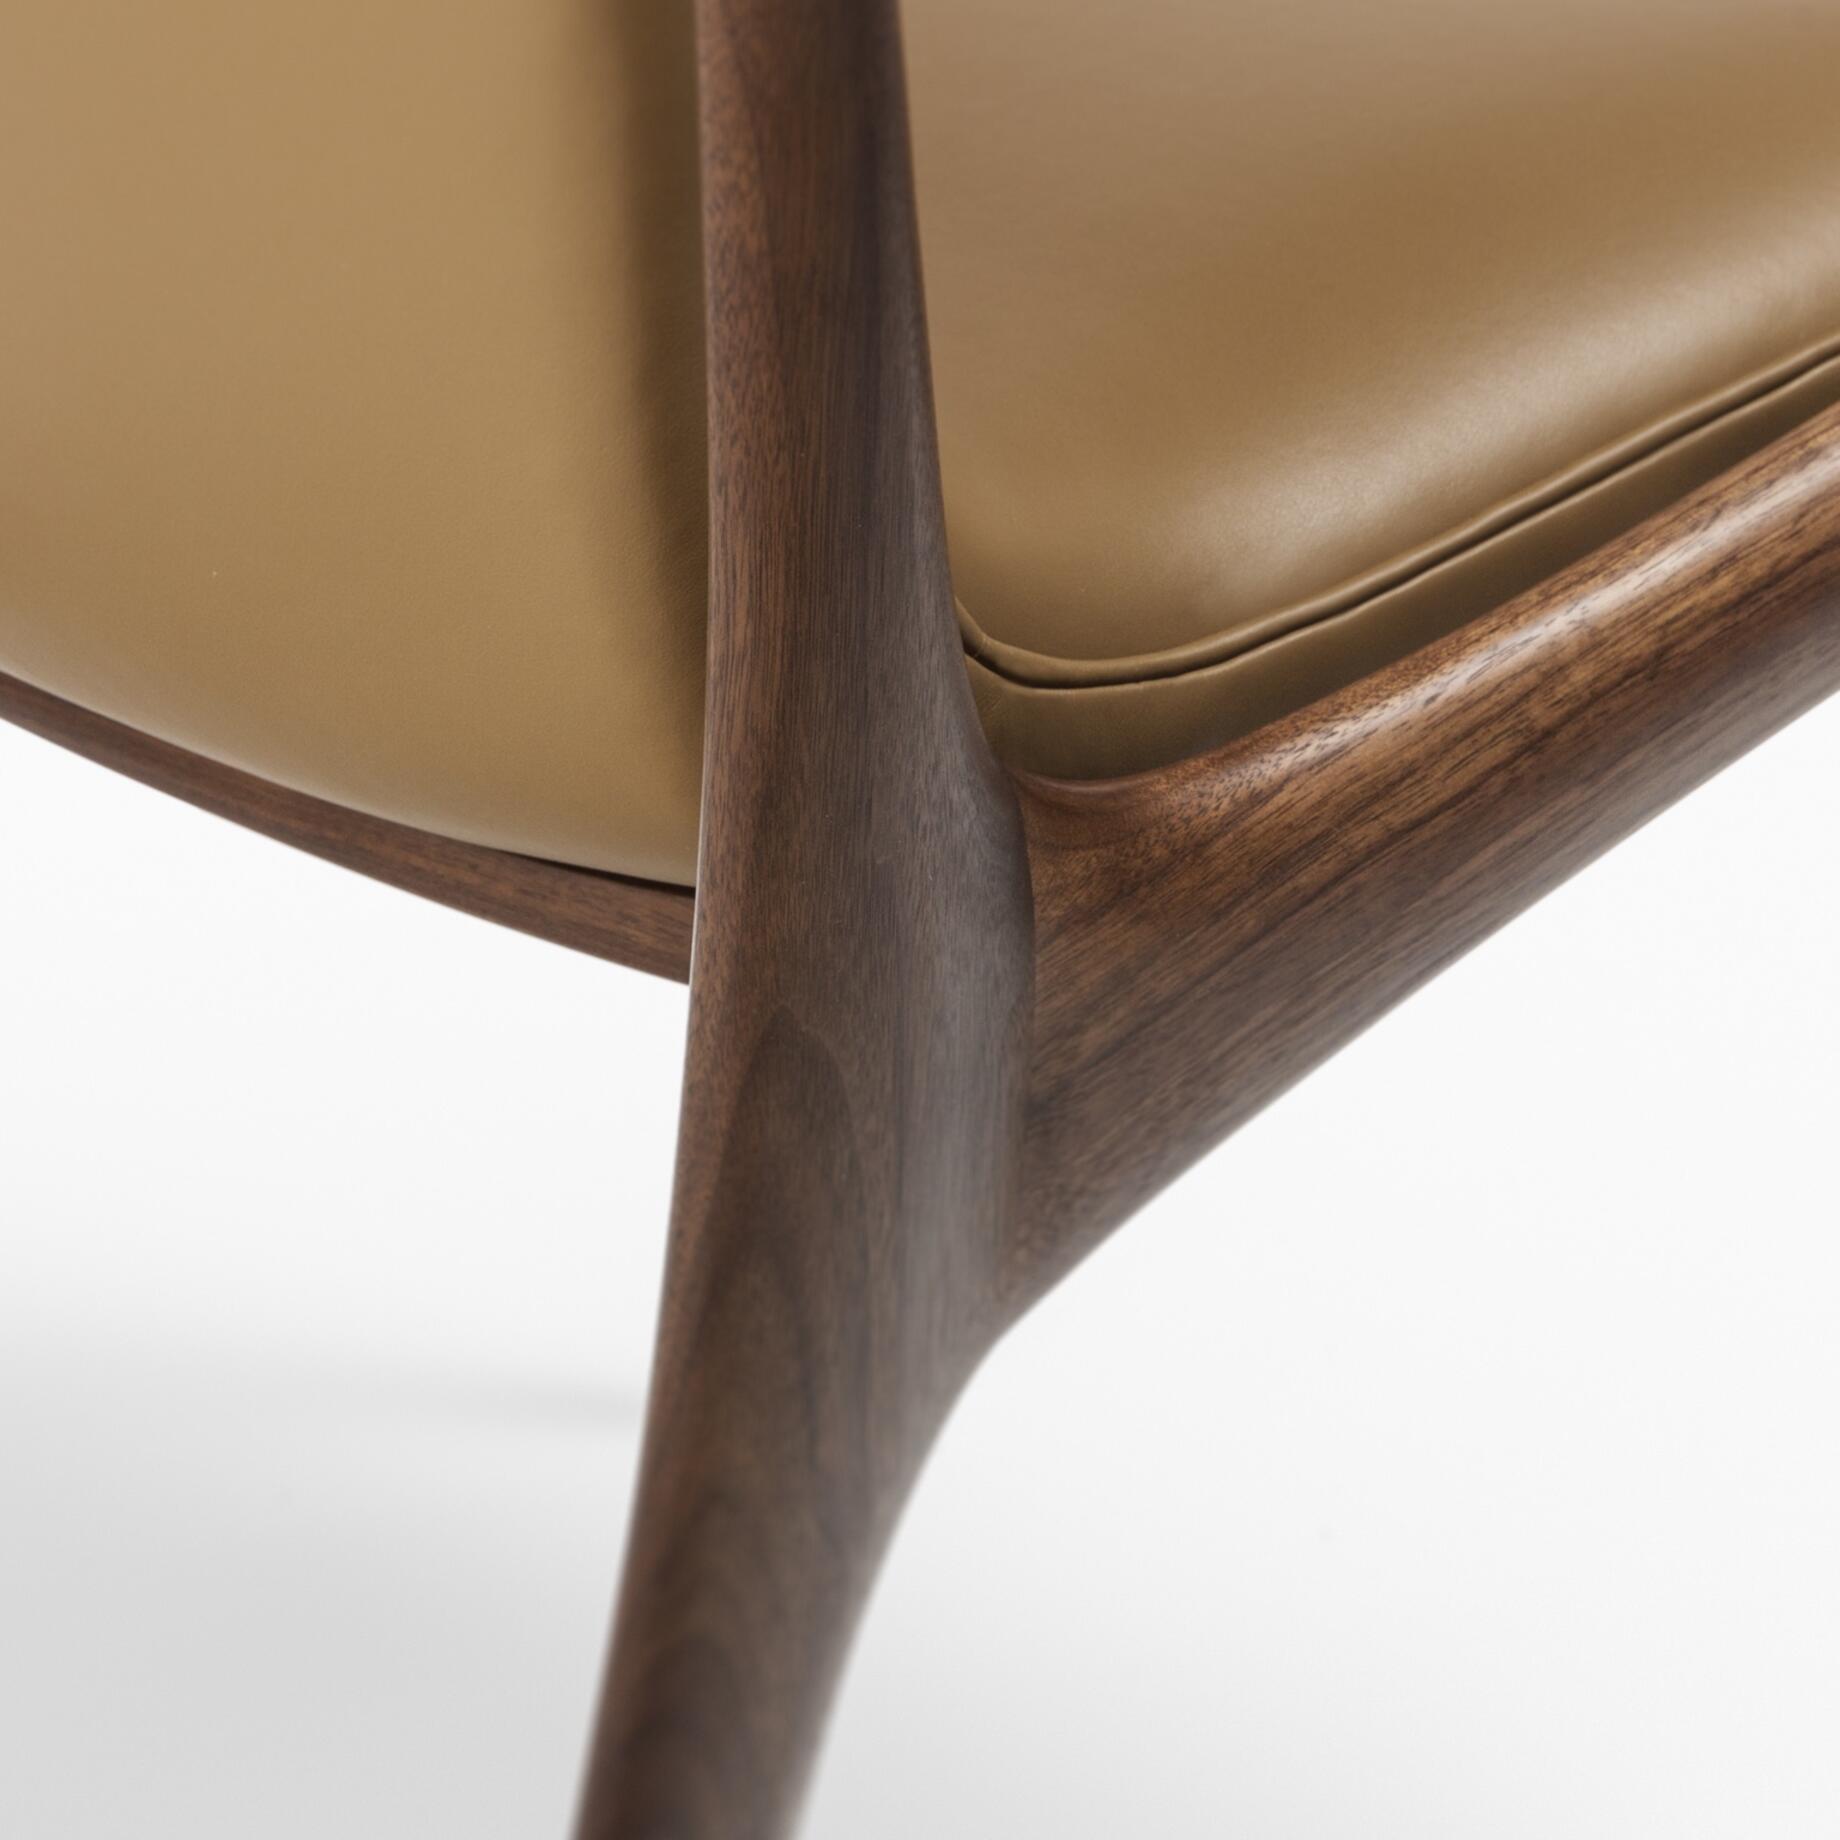 Sculpted Sling Dining Side Chair